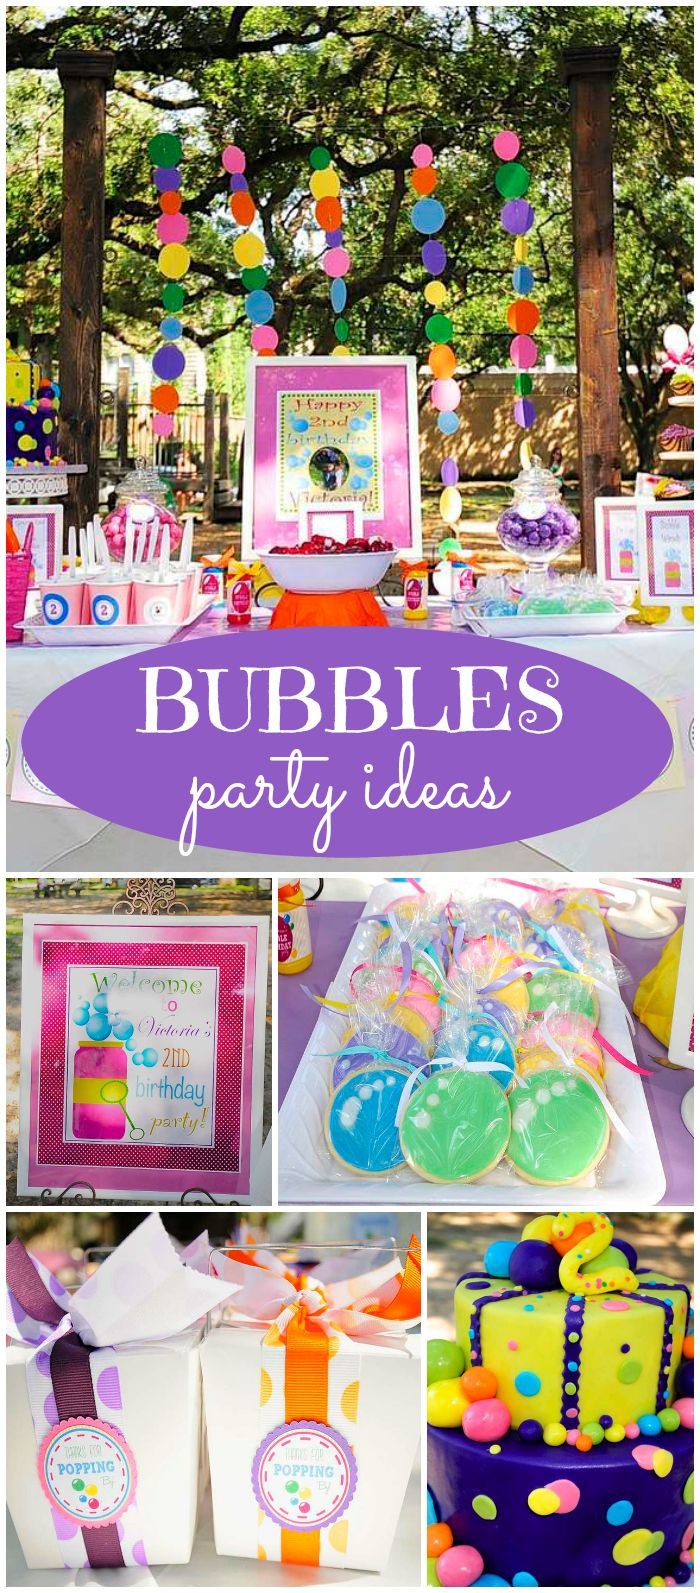 Toddler Birthday Party Ideas
 A bubble party is such a fun theme for a toddler s